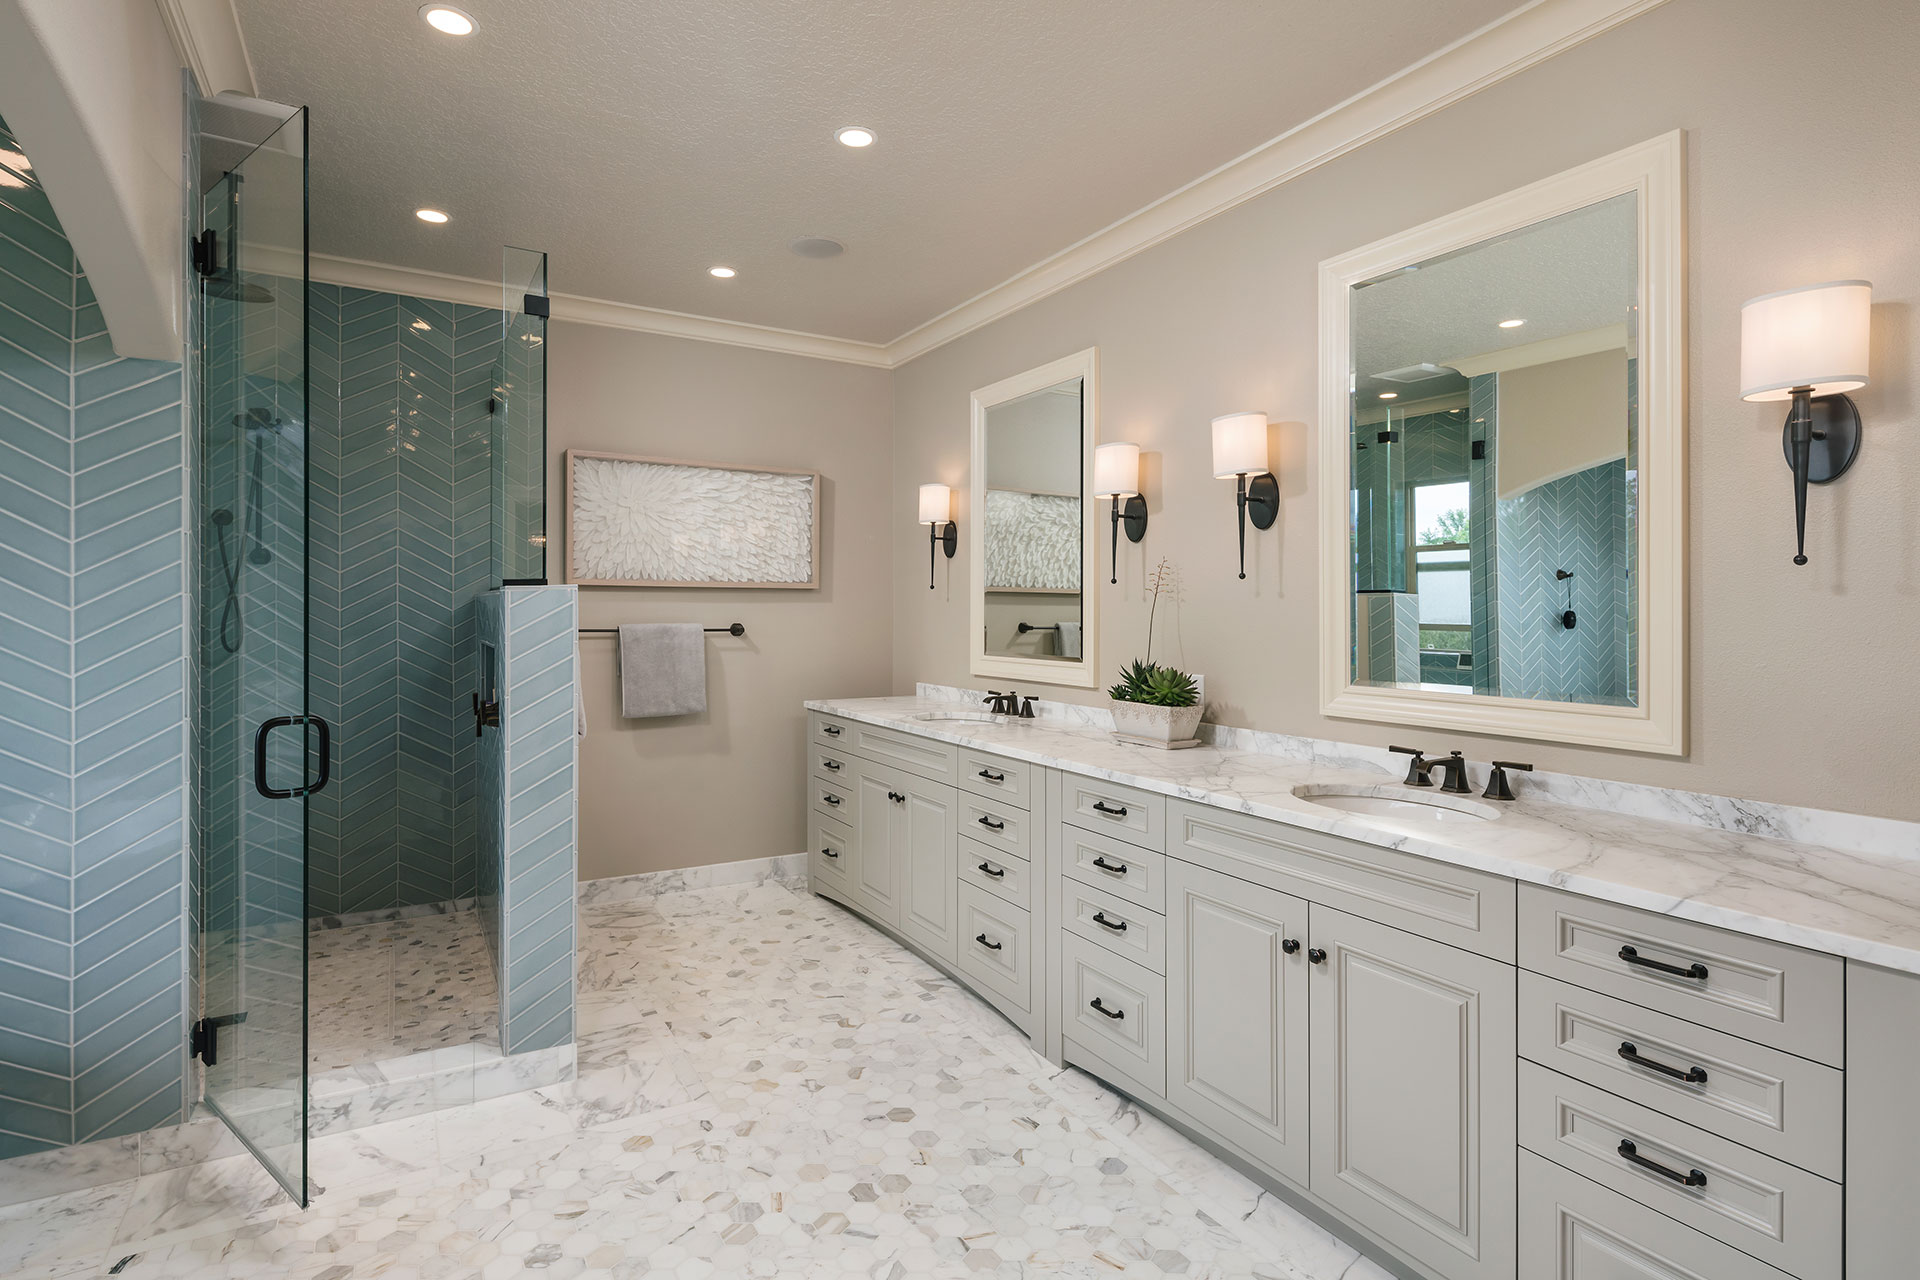 The primary bathroom at Scout's House features a new double vanity and large shower. The floors and countertop are Calacatta marble.